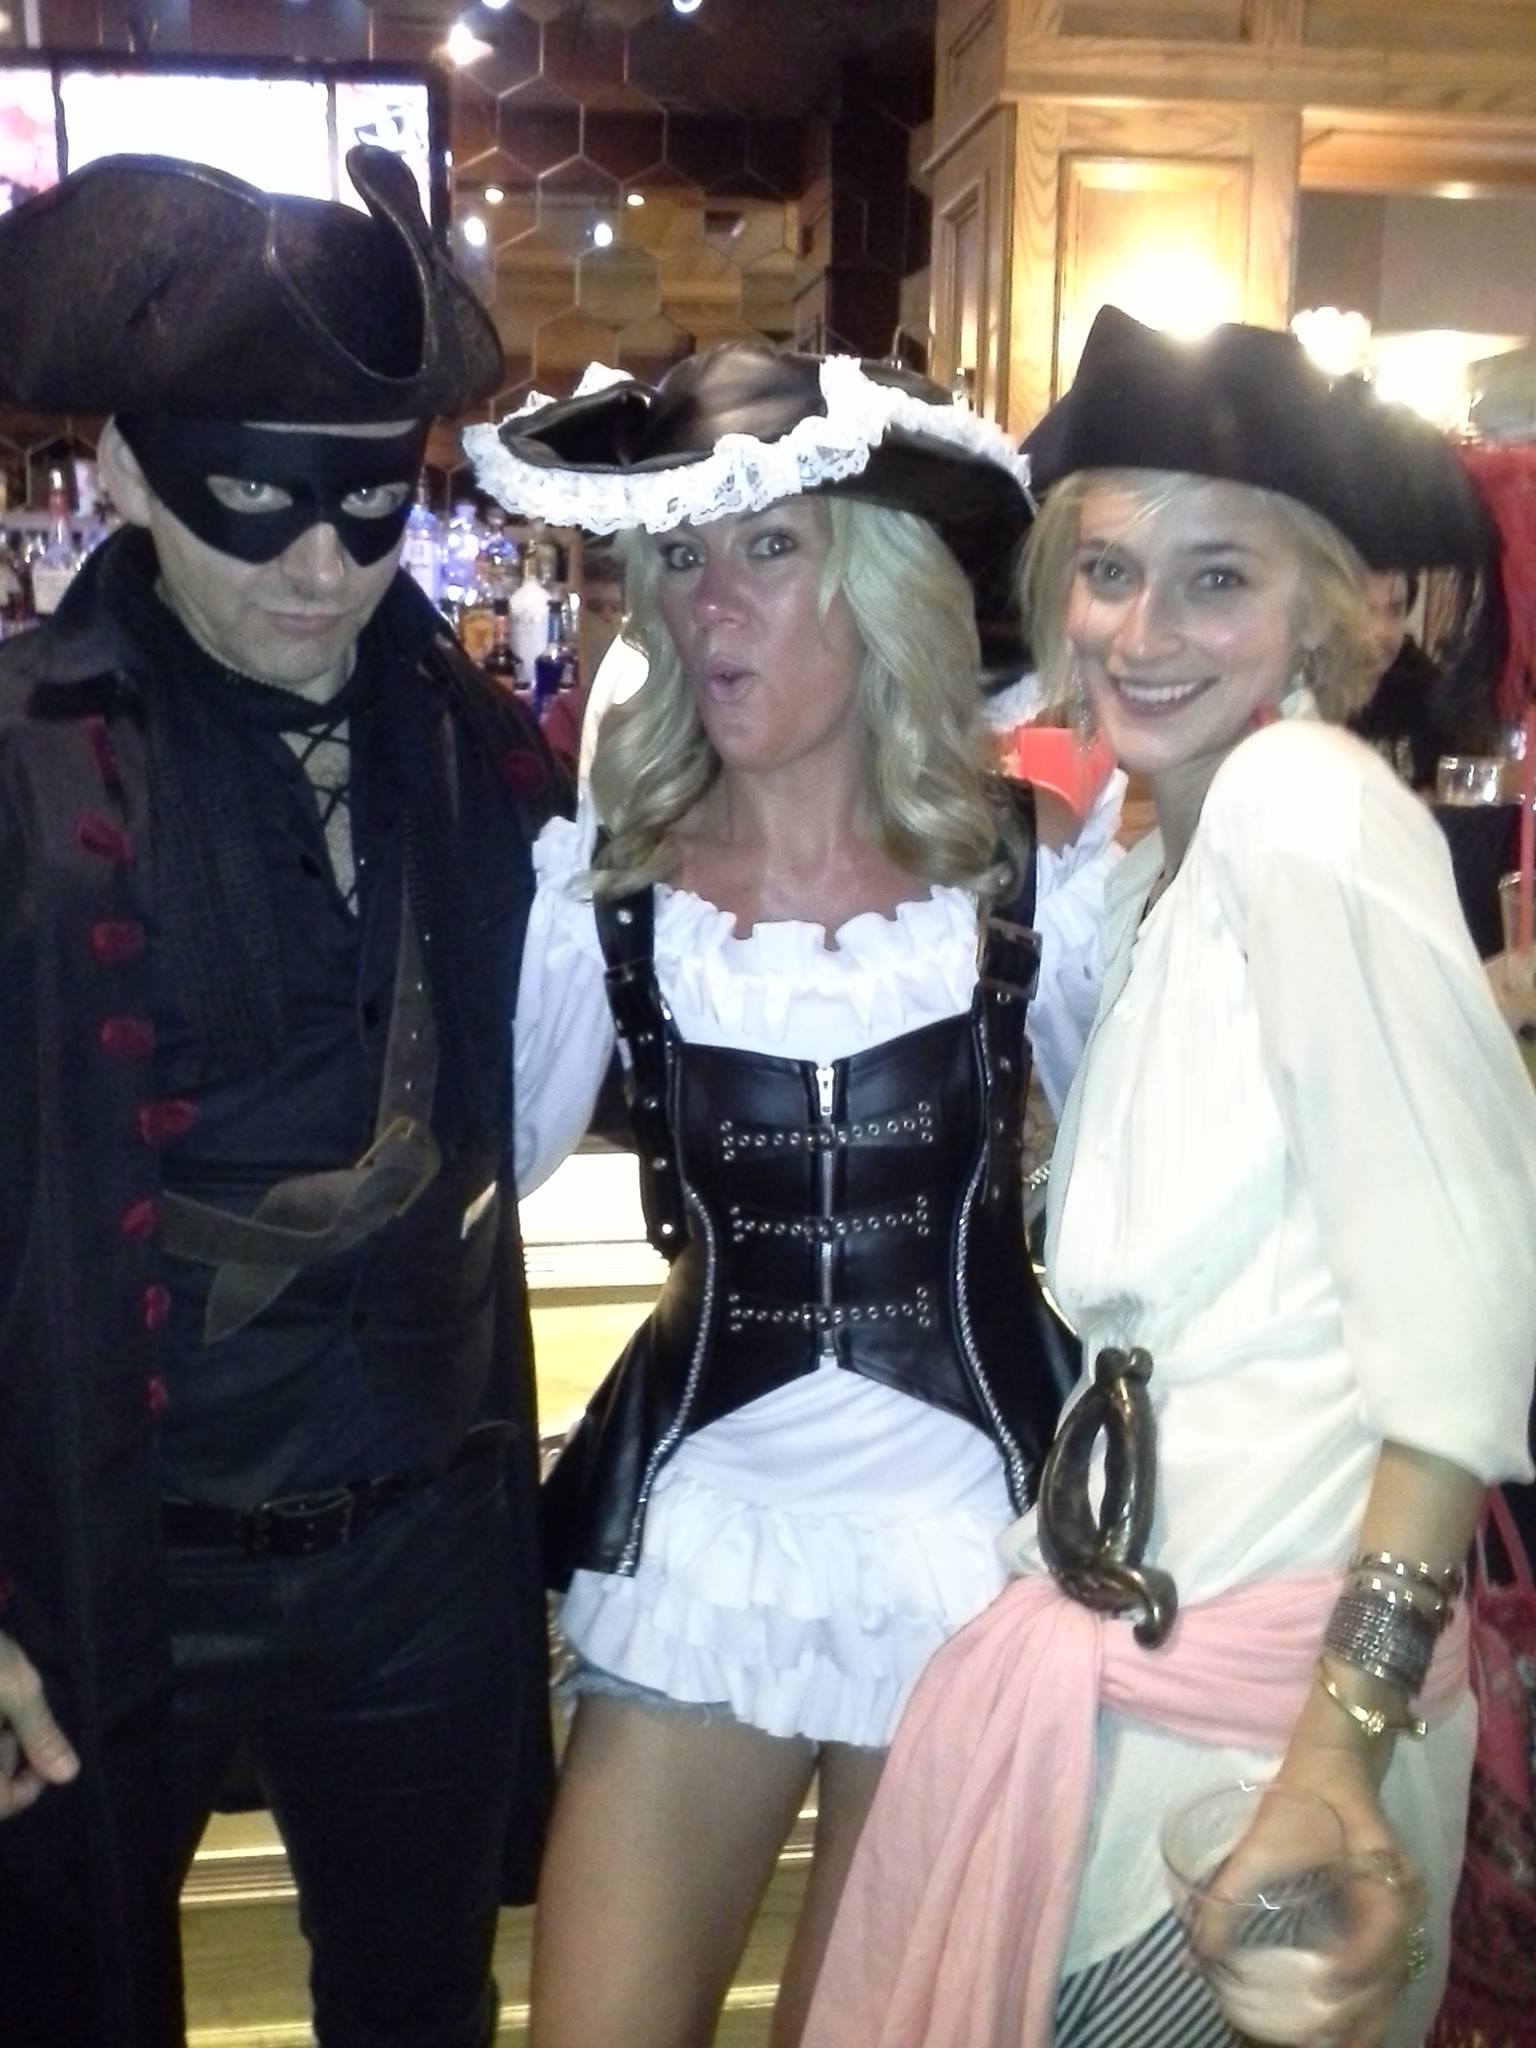 With Michael Sheen and Caitlin FitzGerald at Pirate Themed Wrap Party for 